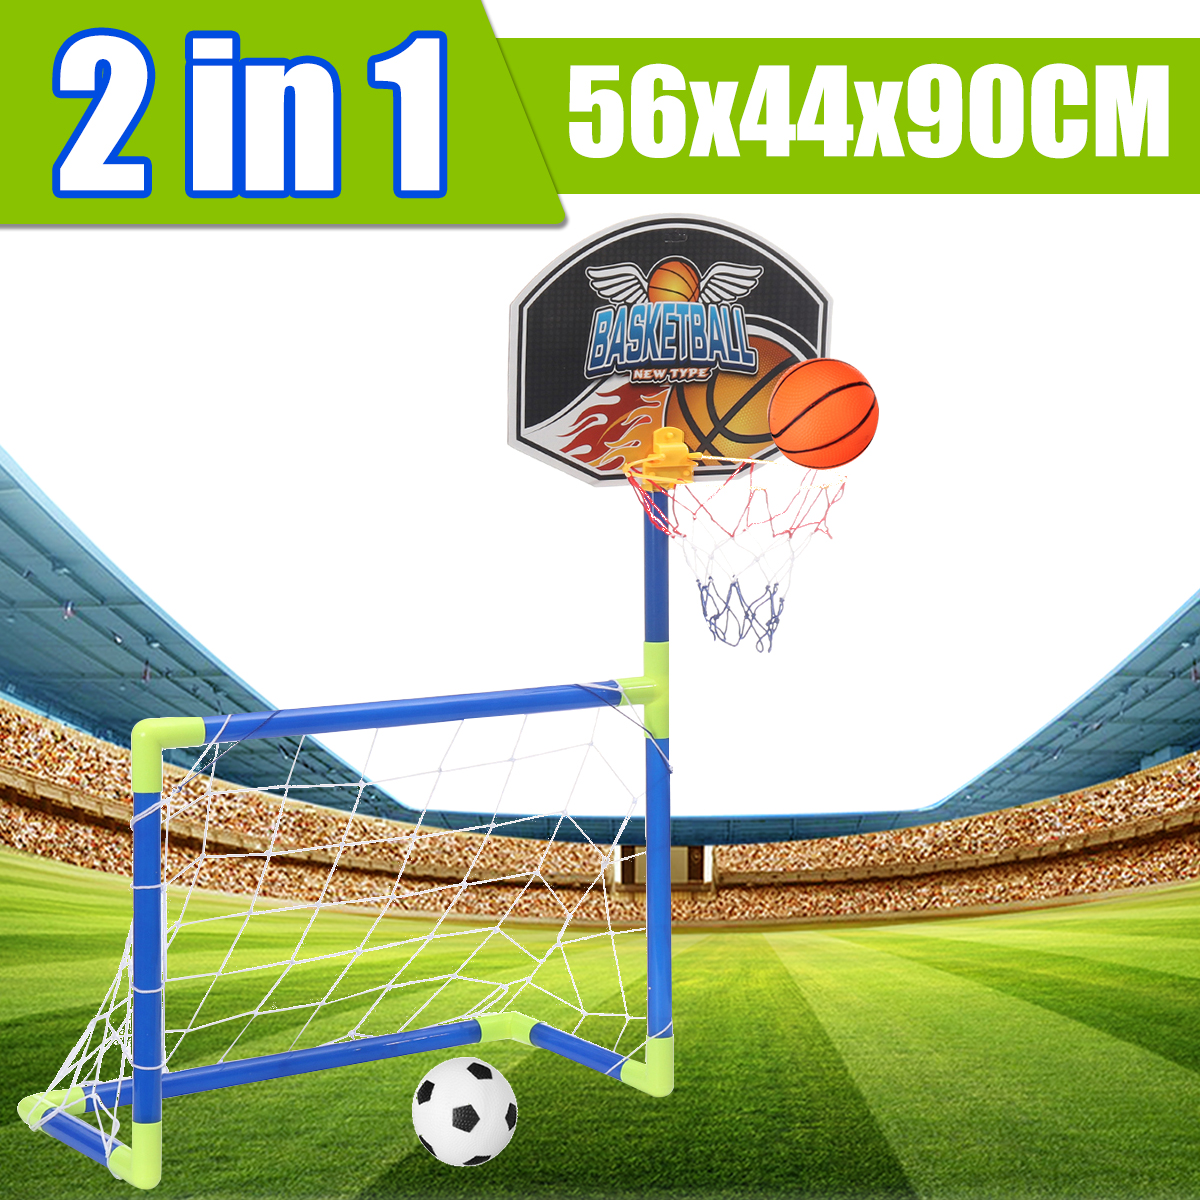 Ball-Football-Sport-Toy-Game-Goals-Basketball-Hoop-Stand-Toys-Kids-Sports-Game-1685455-1